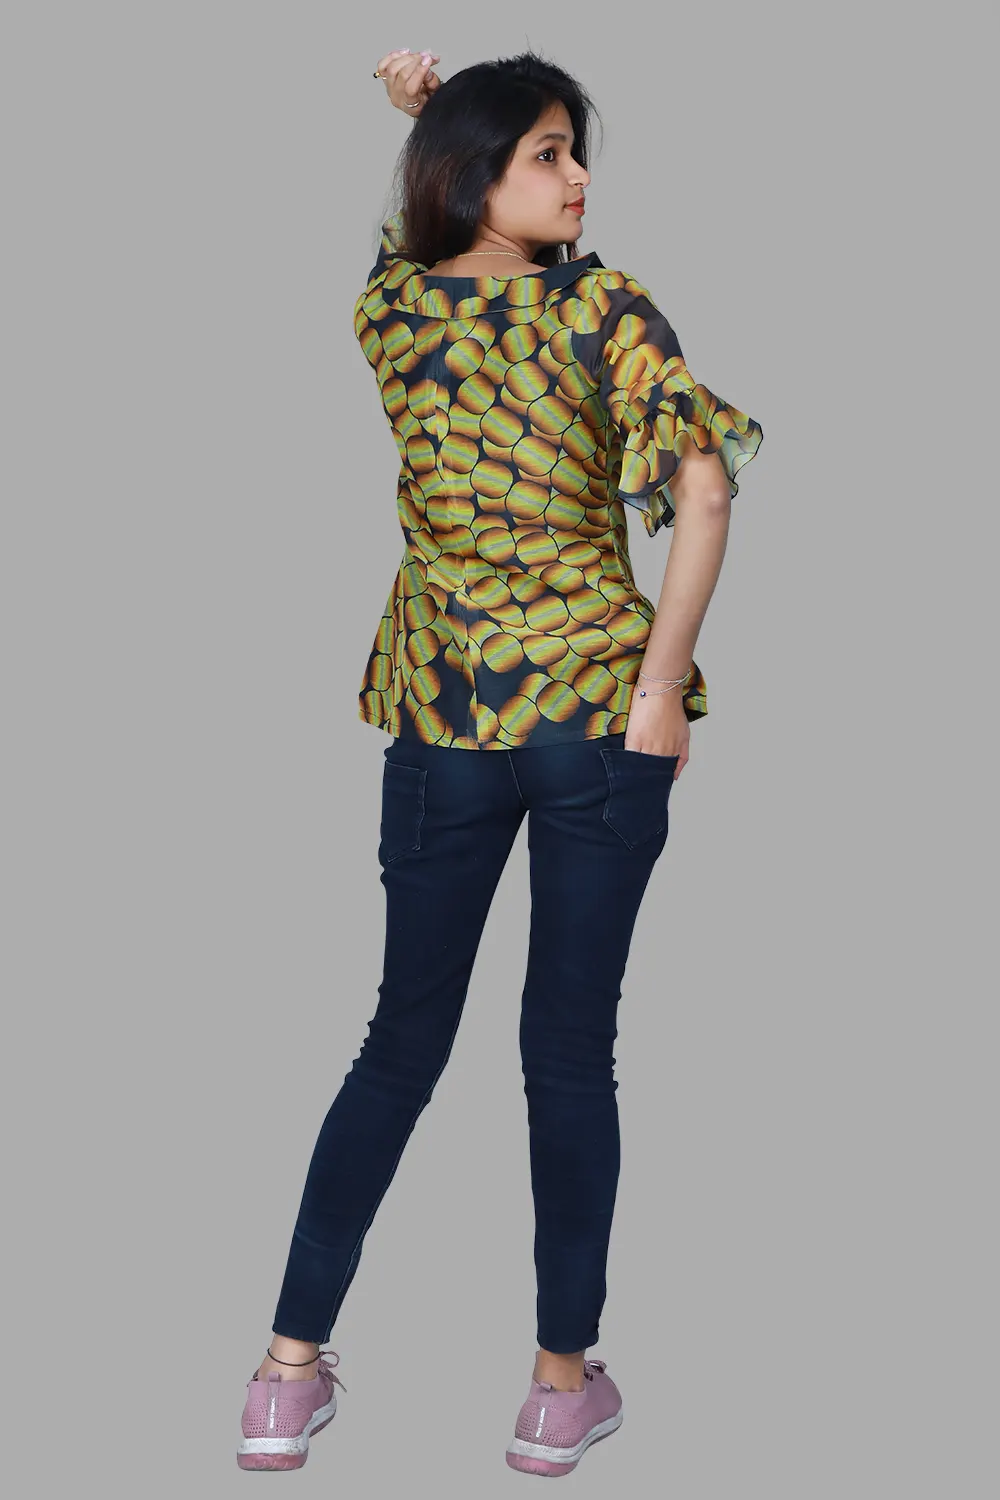 Yellow and Black Printed Short Top | S3C1247